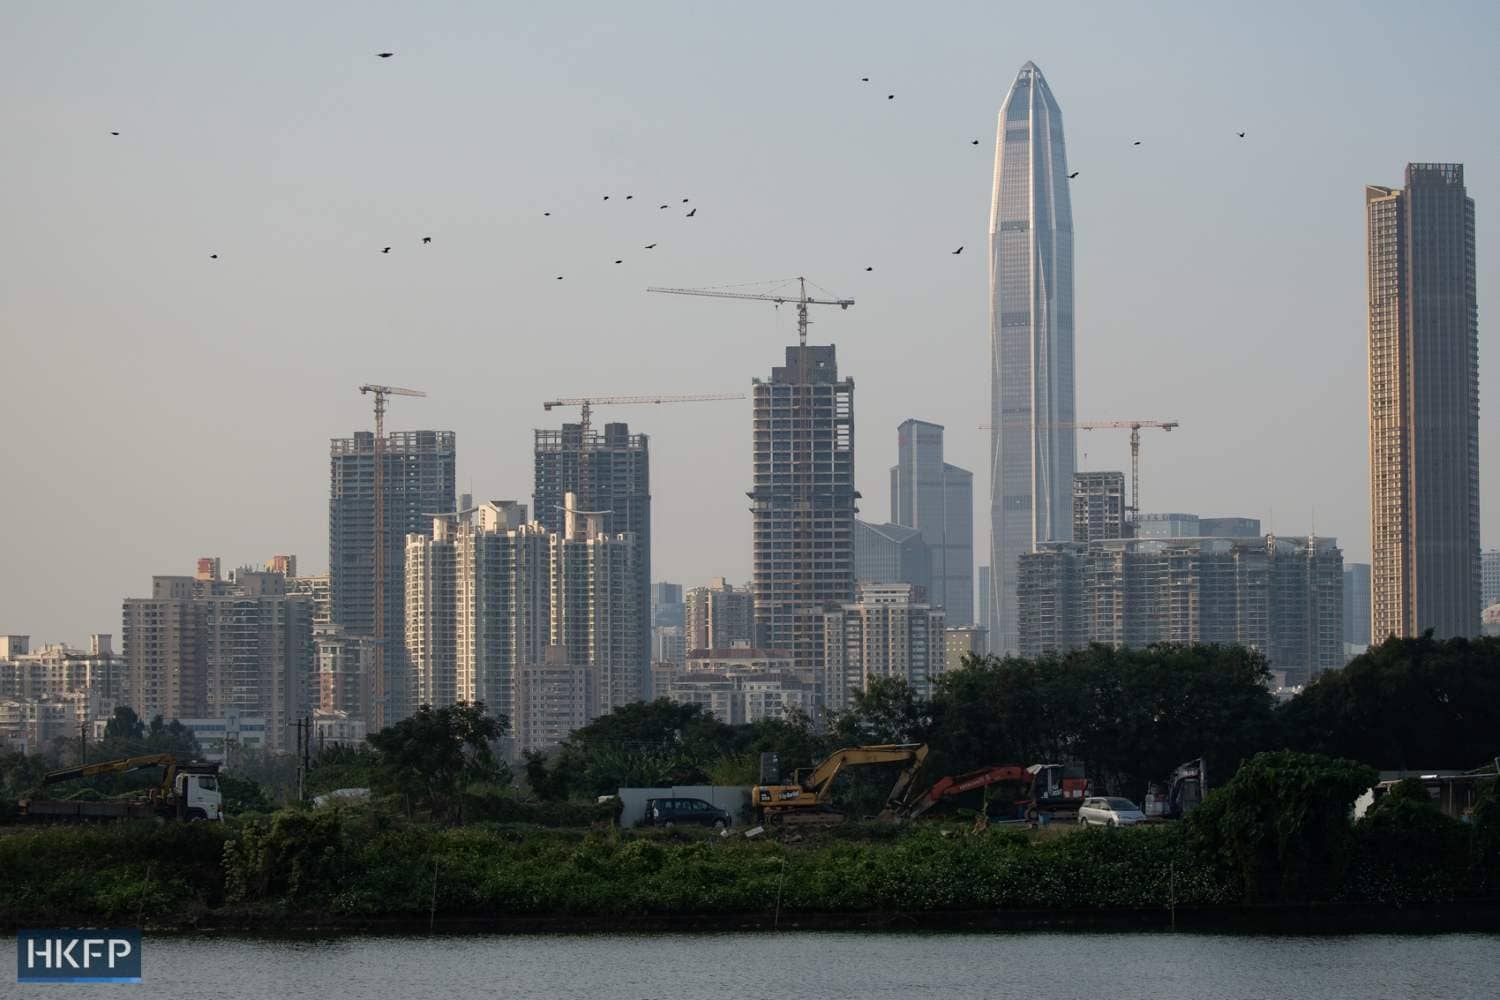 Hong Kong's San Tin area, with Shenzhen's skyscrapers being no far away. Photo: Kyle Lam/HKFP.